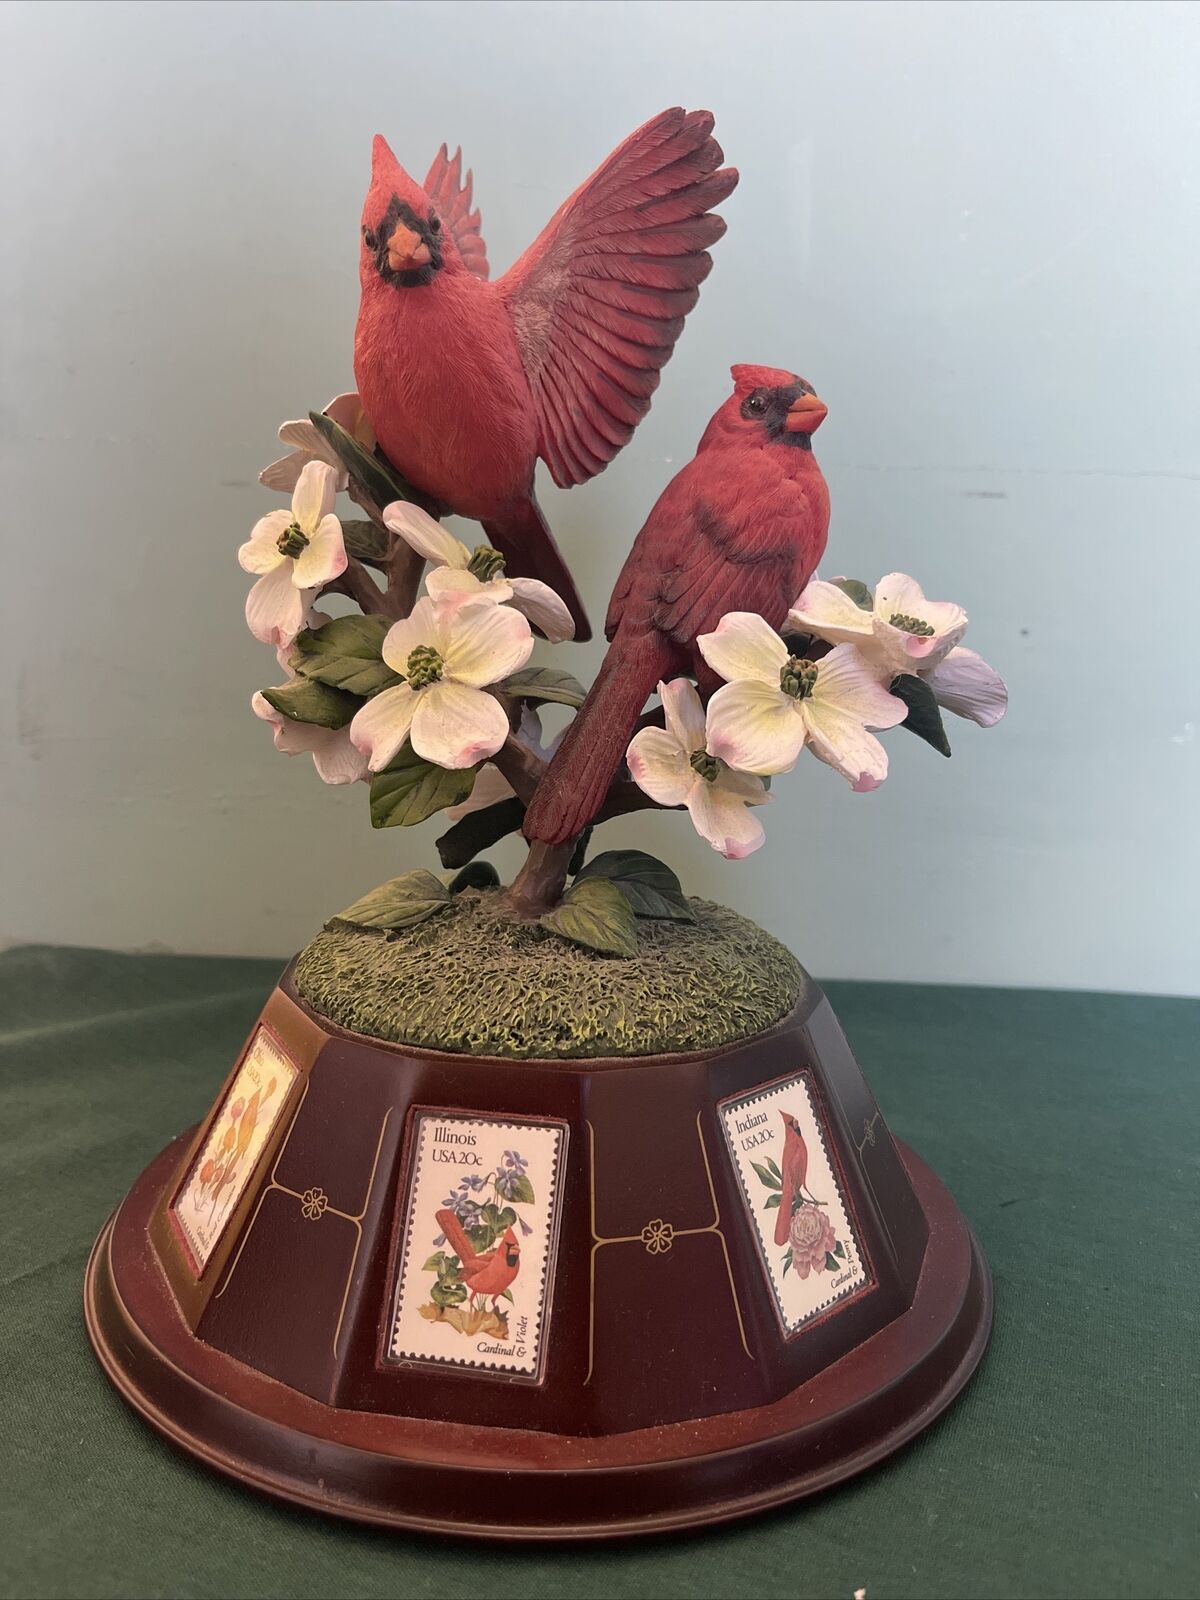 VTG Danbury Mint Red Cardinal Statue by Bob Guge  'Spring Glory' Stamps Incl.